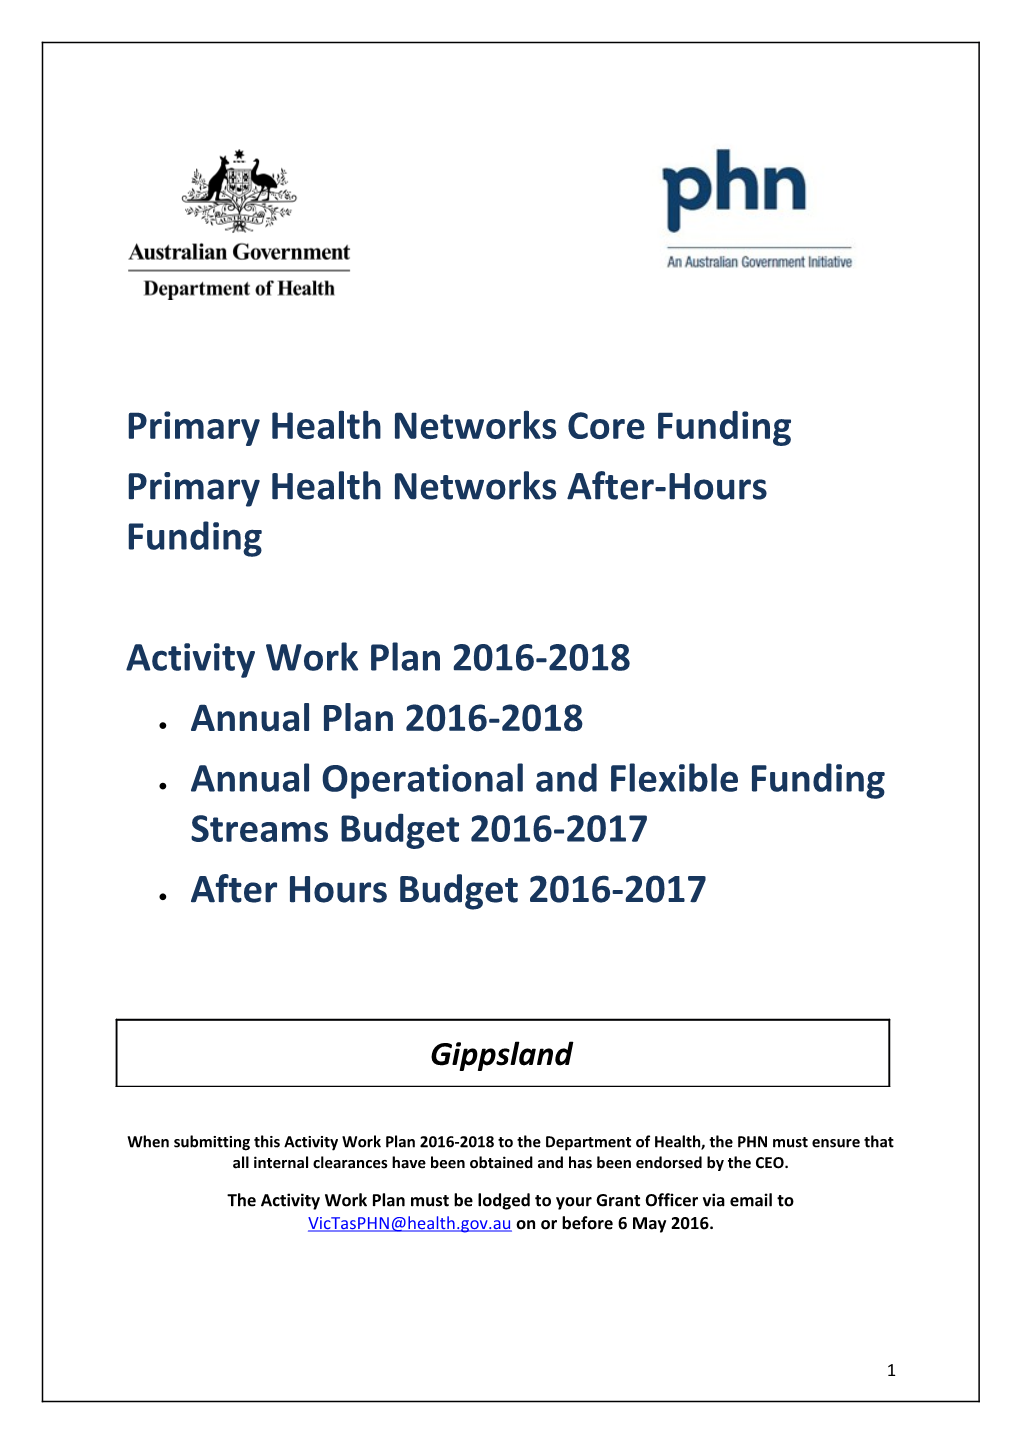 Primary Health Networks Core Funding